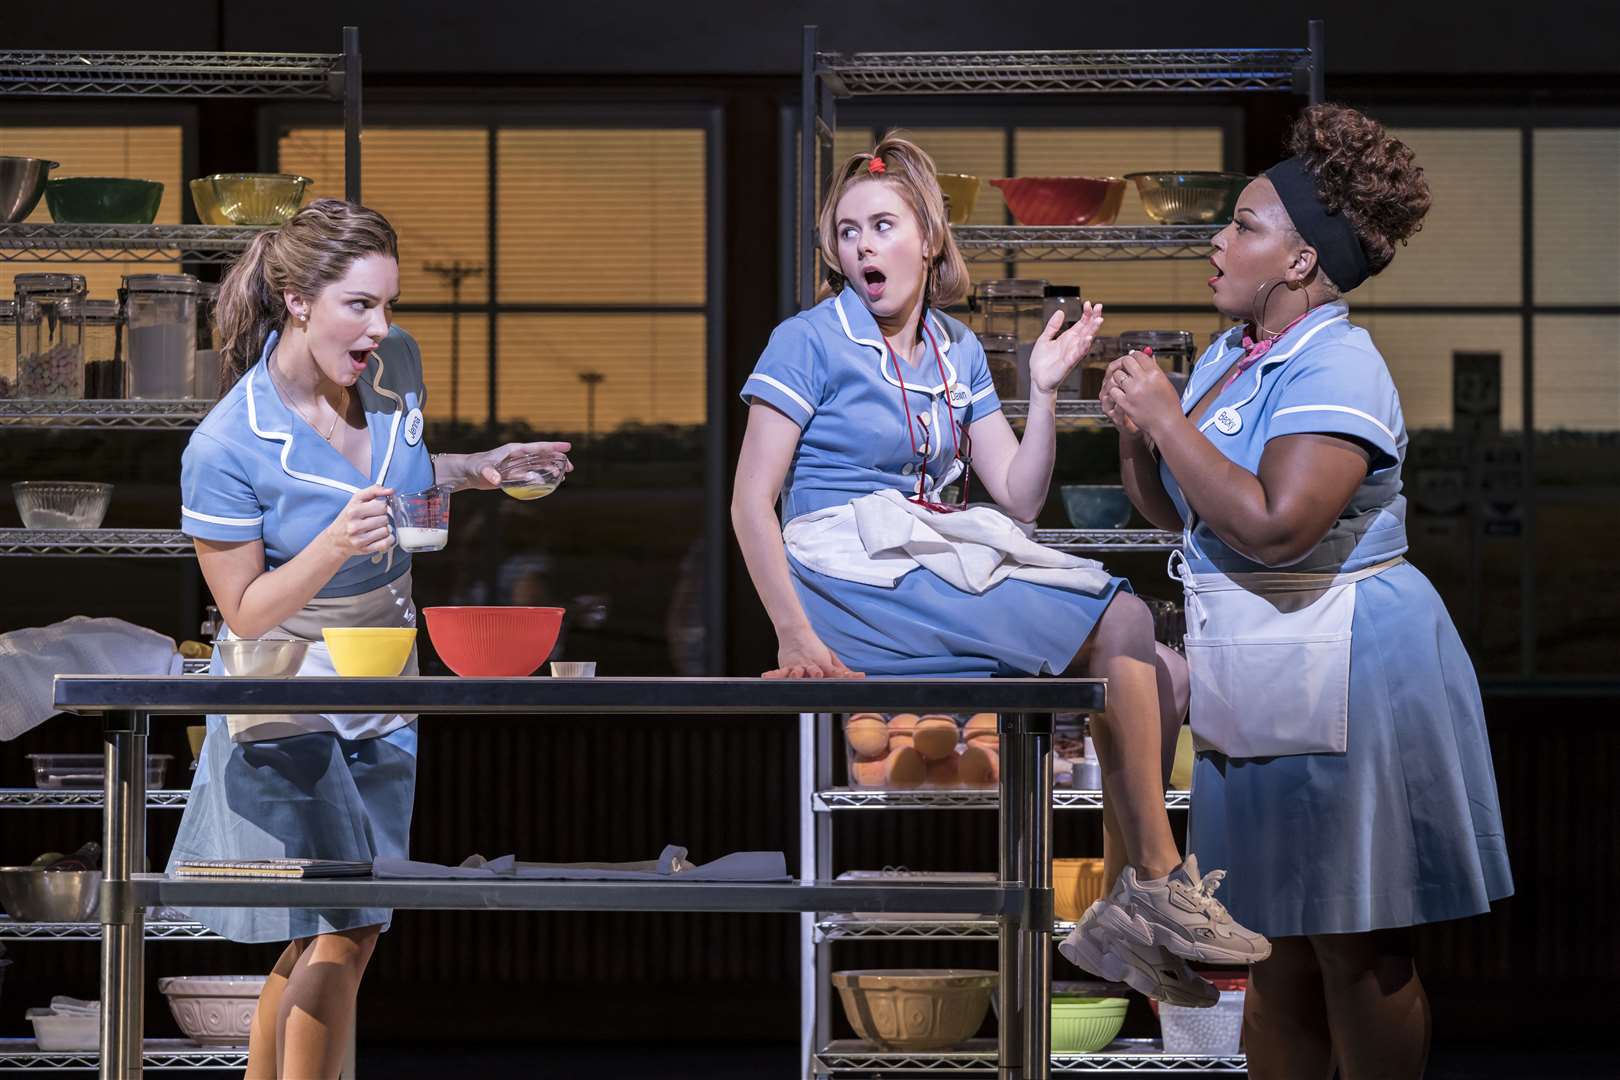 Waitress production images. All photo credit : Johan Persson (8083703)